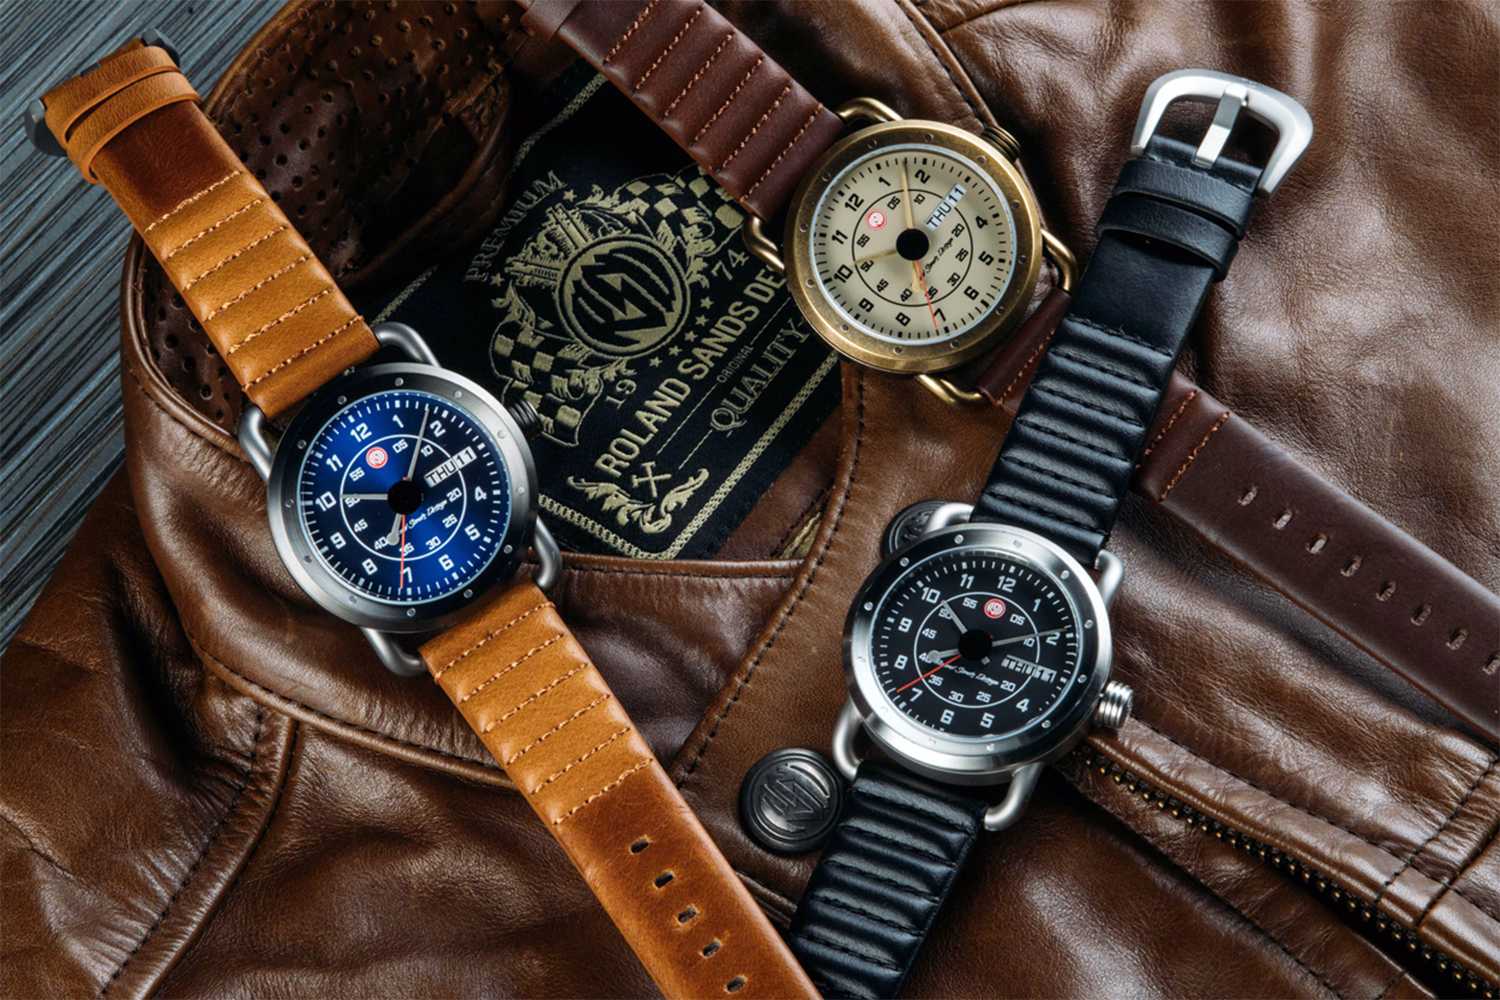 Three watches from Szanto's Roland Sands Icon 2200 Series sitting on top of a brown leather jacket